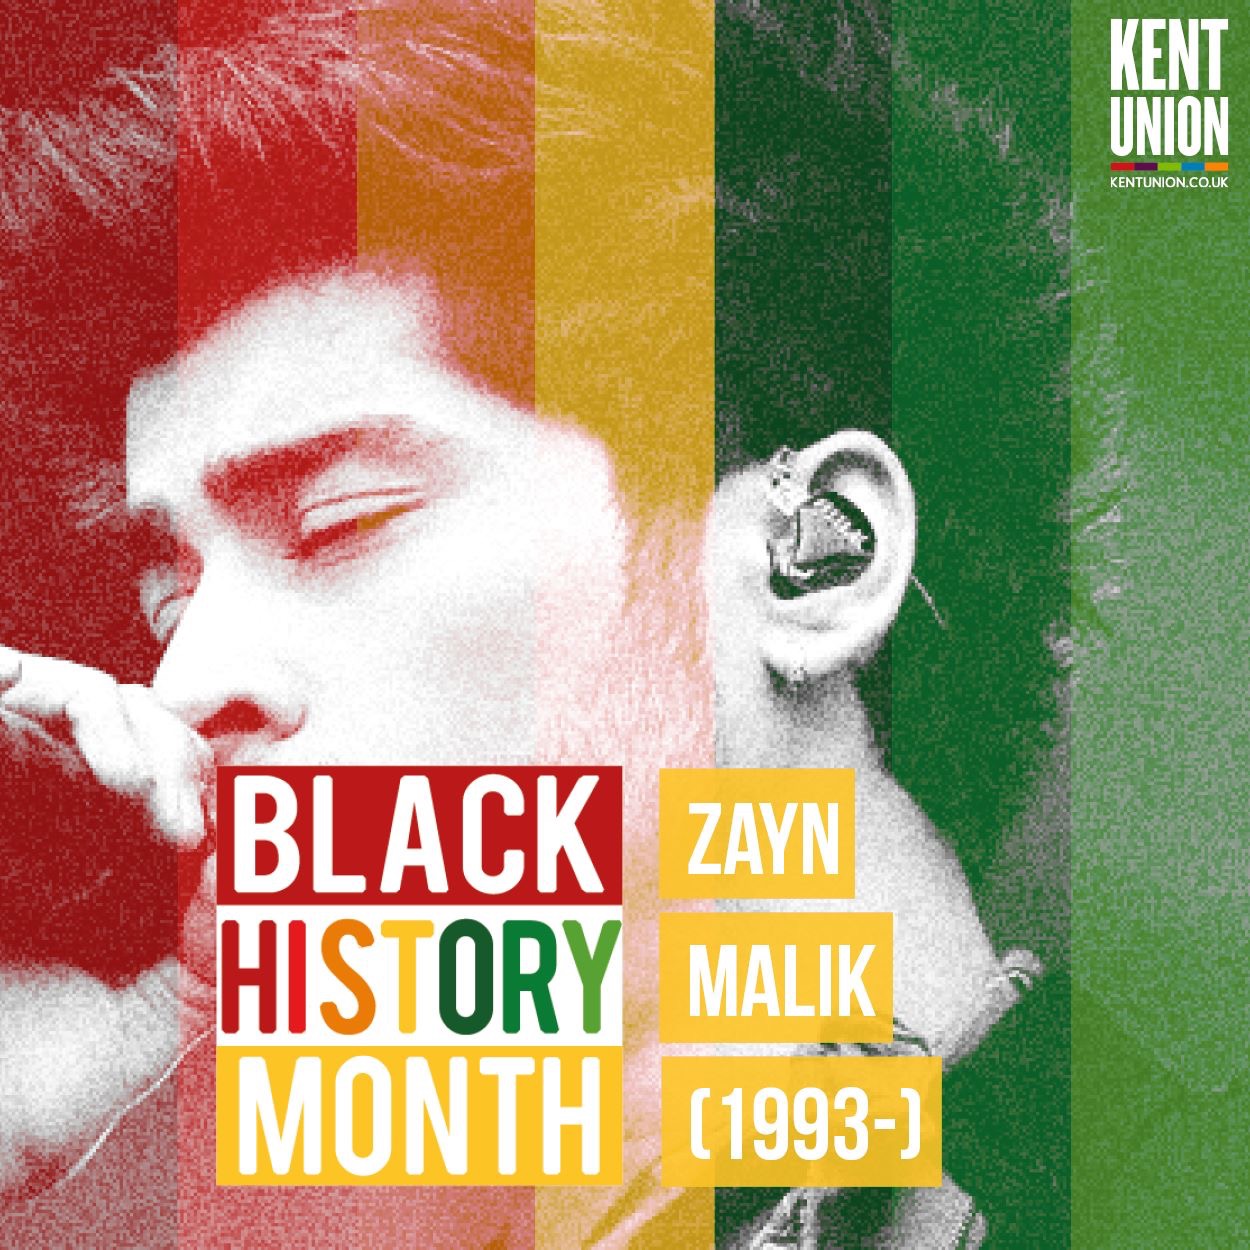 Introducing Zayn Malik and other non-black cornerstones of Black History